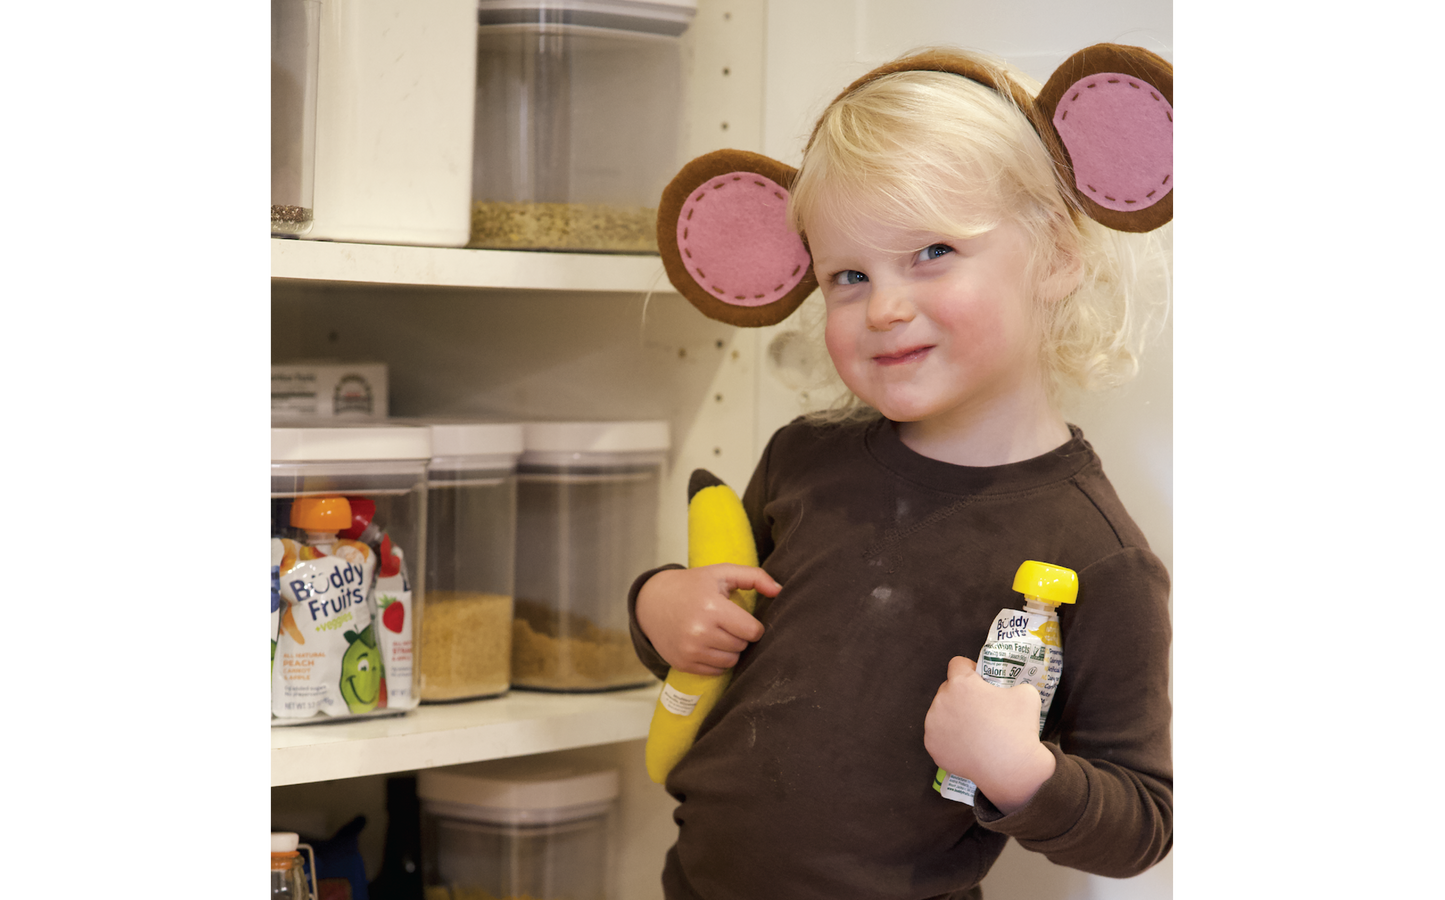 Young Buddy Fruits fan in a monkey costume sneaks into pantry to enjoy a Buddy Fruits Banana & Apple fruit pouch.